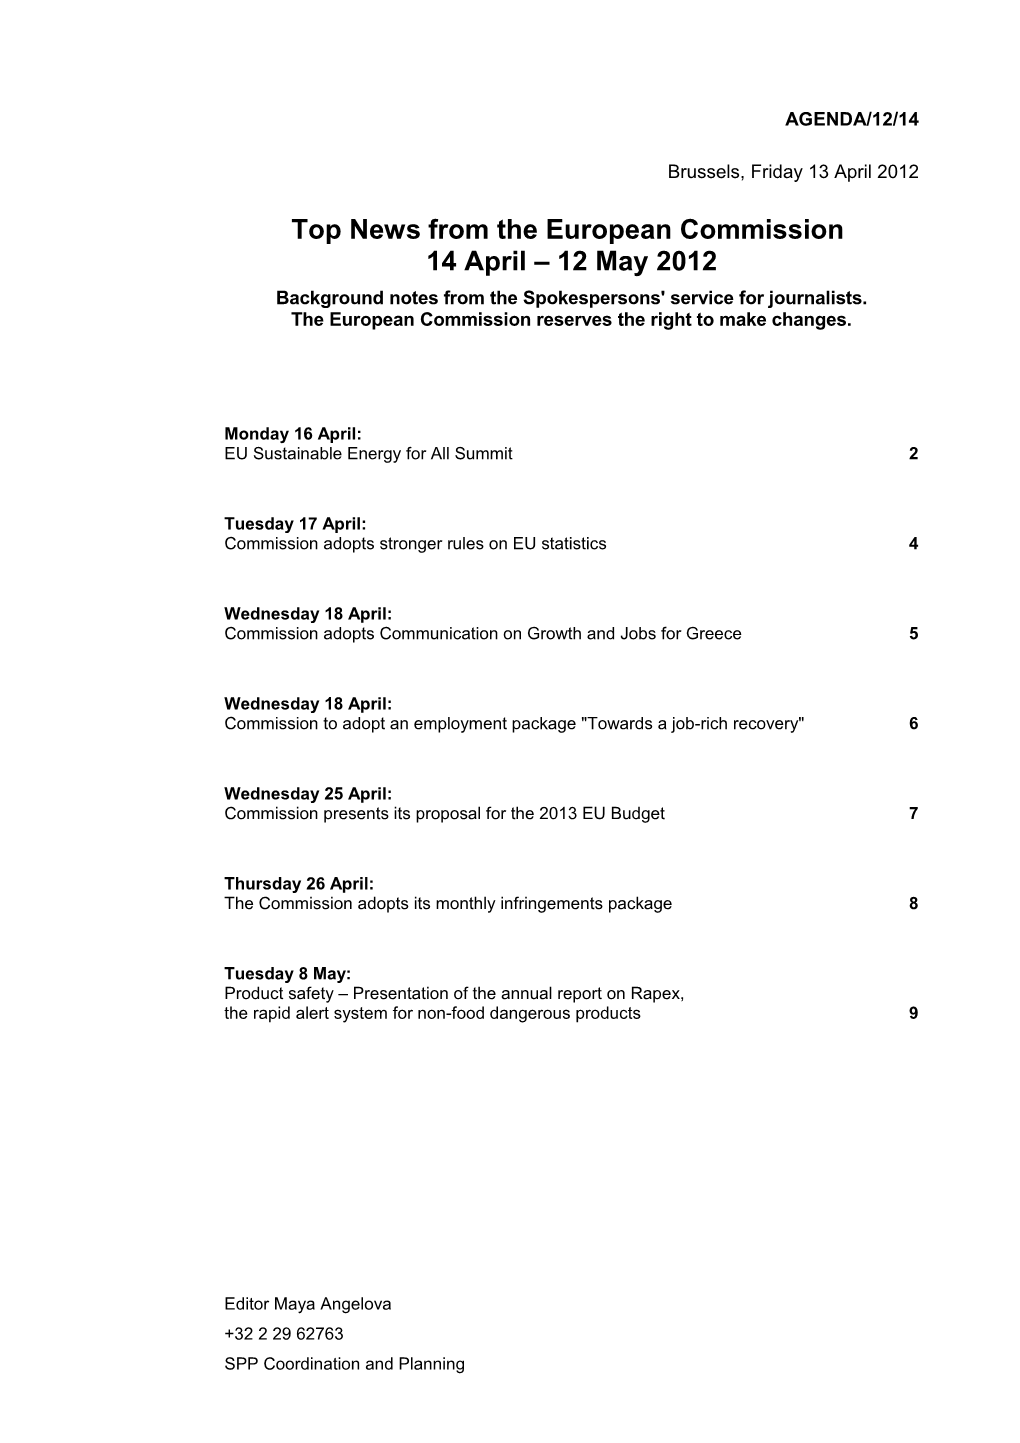 Top News from the European Commission 14 April 12May2012